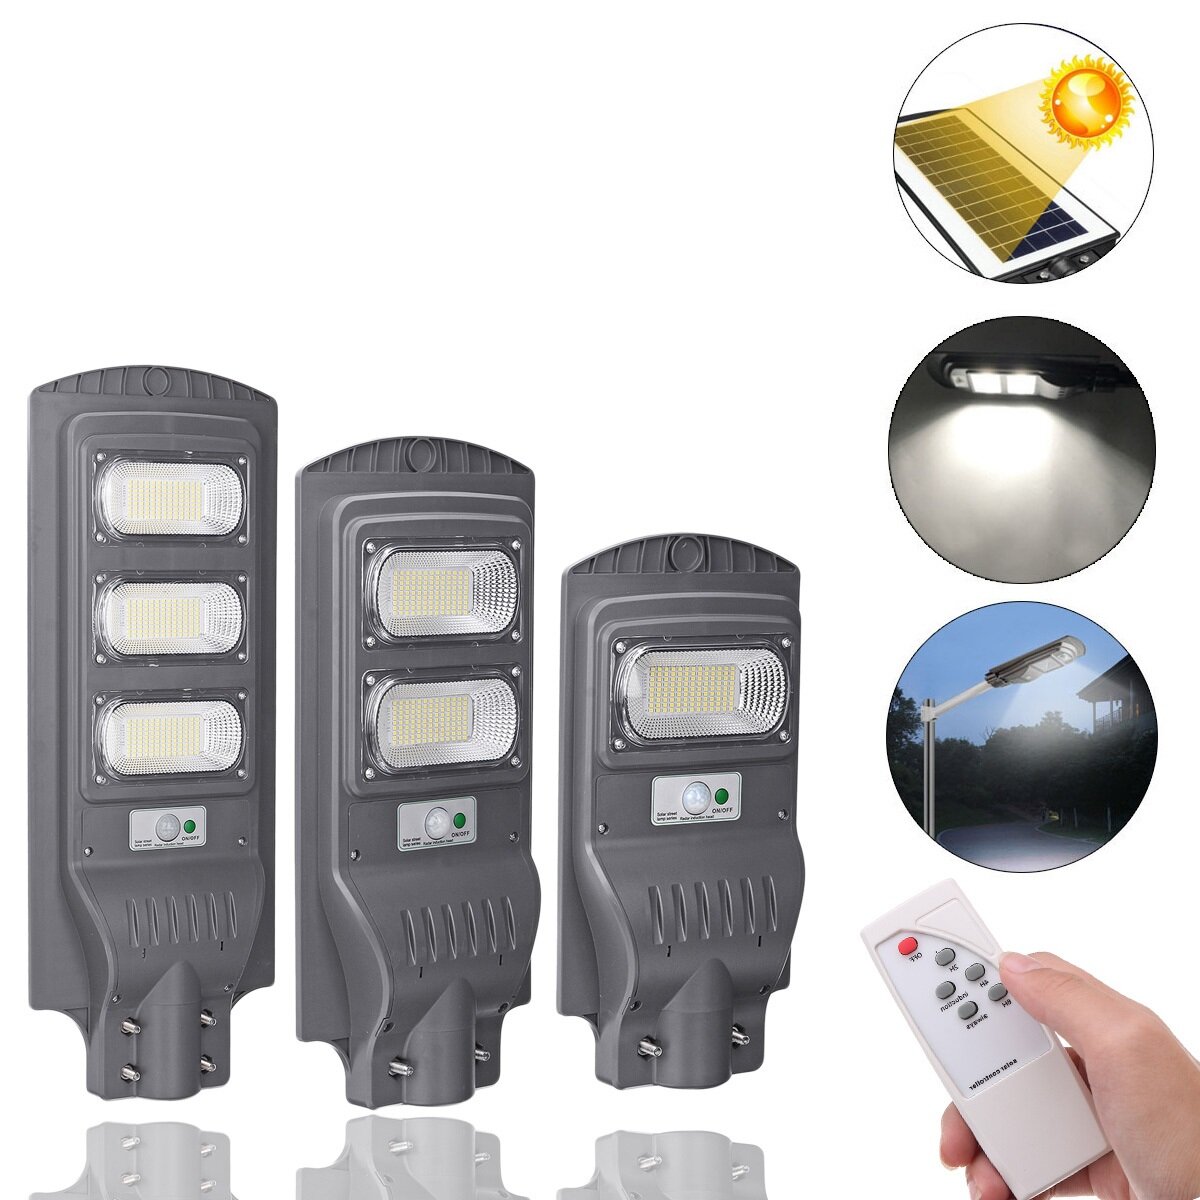 Image of 117/234/351 LED Solar Wall Street Light PIR Motion Sensor Outdoor Lamp with Remote Controller